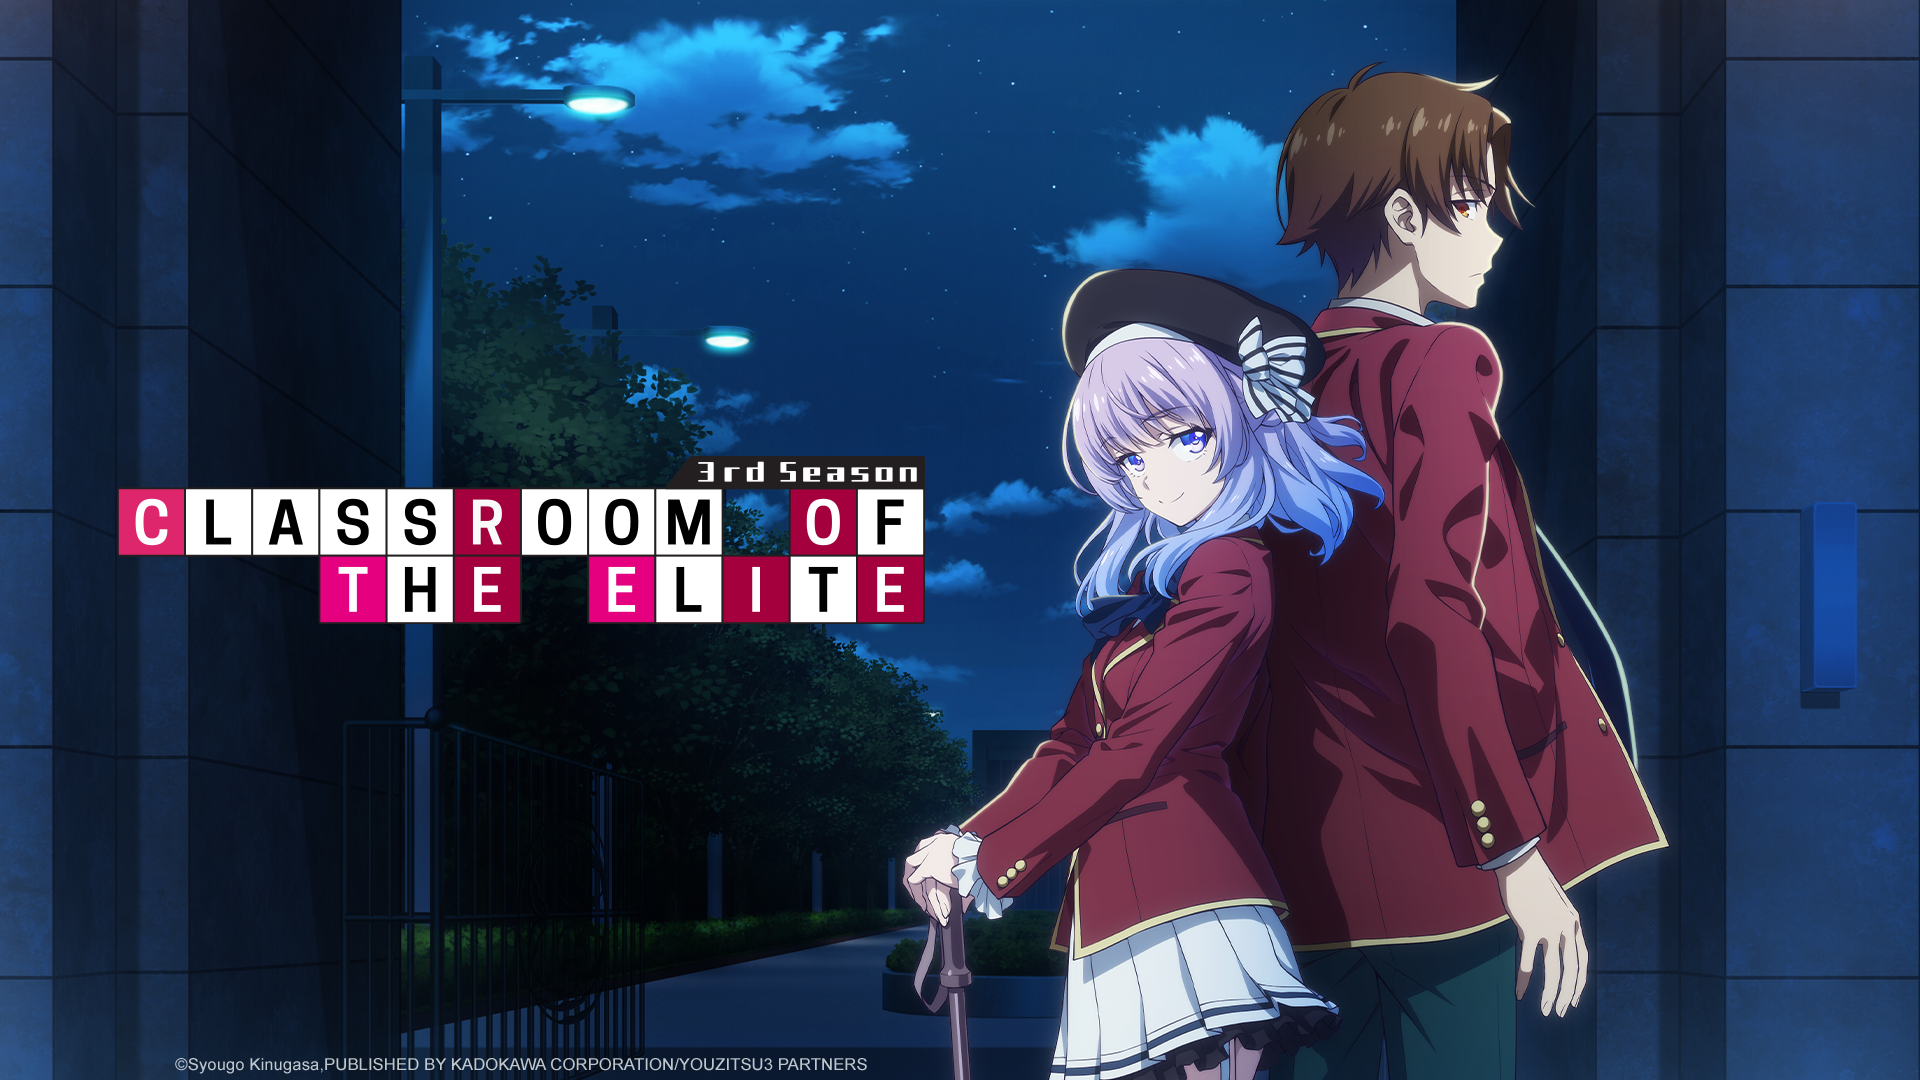 AnimeTV チェーン on X: Classroom of the Elite Season 2 Coming on Crunchyroll  on July 4! International Premiere of episode 1 is scheduled for July 3!  (3:00 pm PT) The season 2